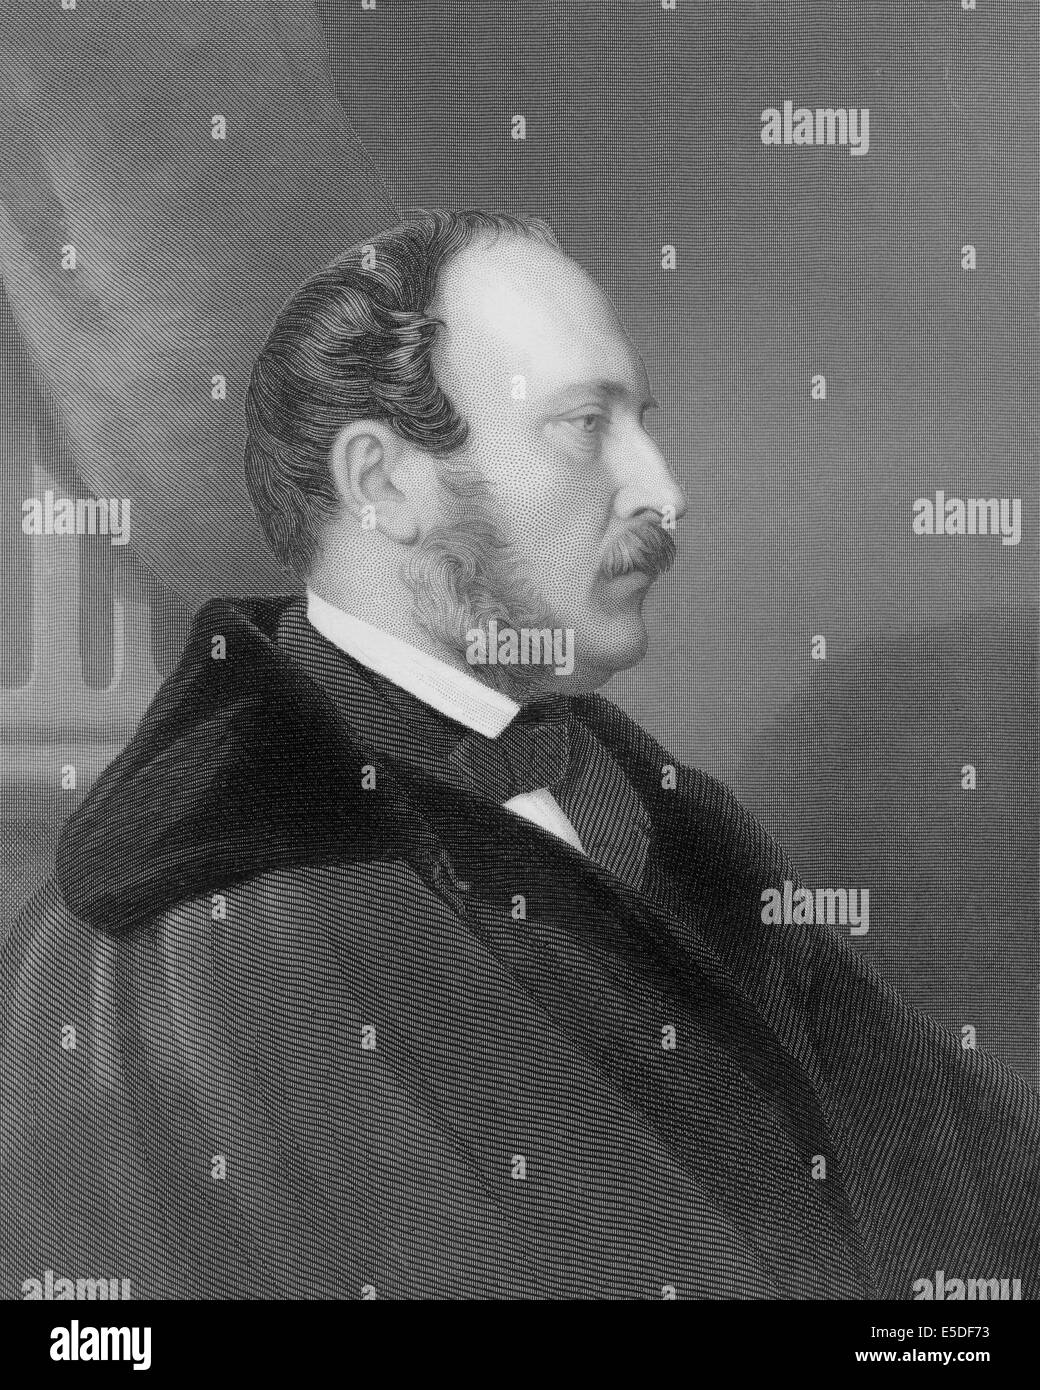 Steel engraving, c. 1860, Prince Franz Albrecht August Karl Emanuel of Saxe Coburg and Gotha, Duke of Saxony, called Albert, Stock Photo